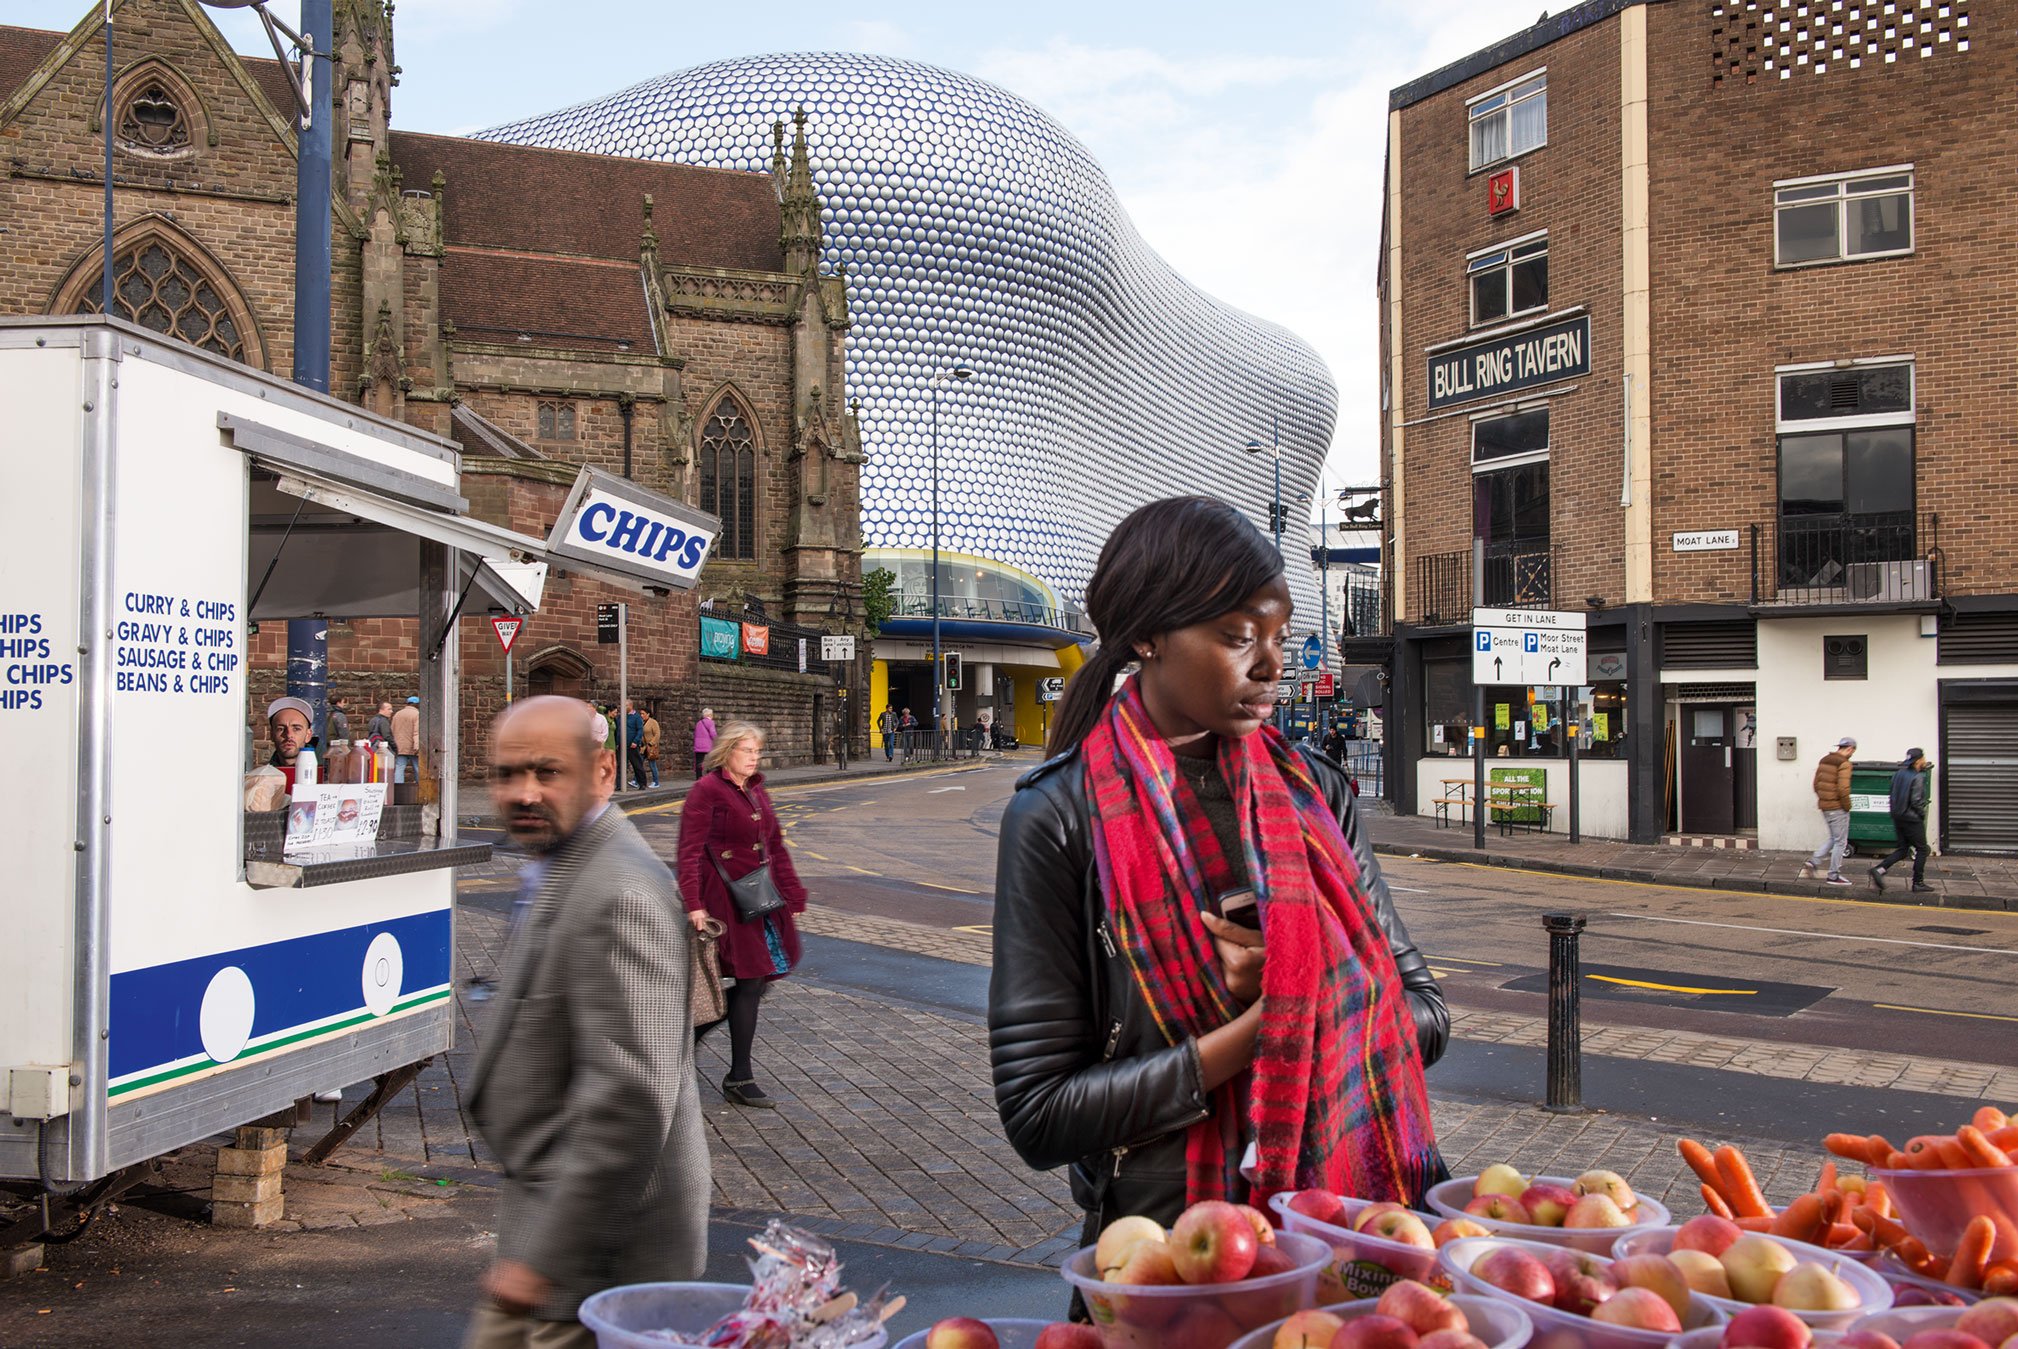 A market scene in Birmingham with a mixture of old and new building styles in the background.